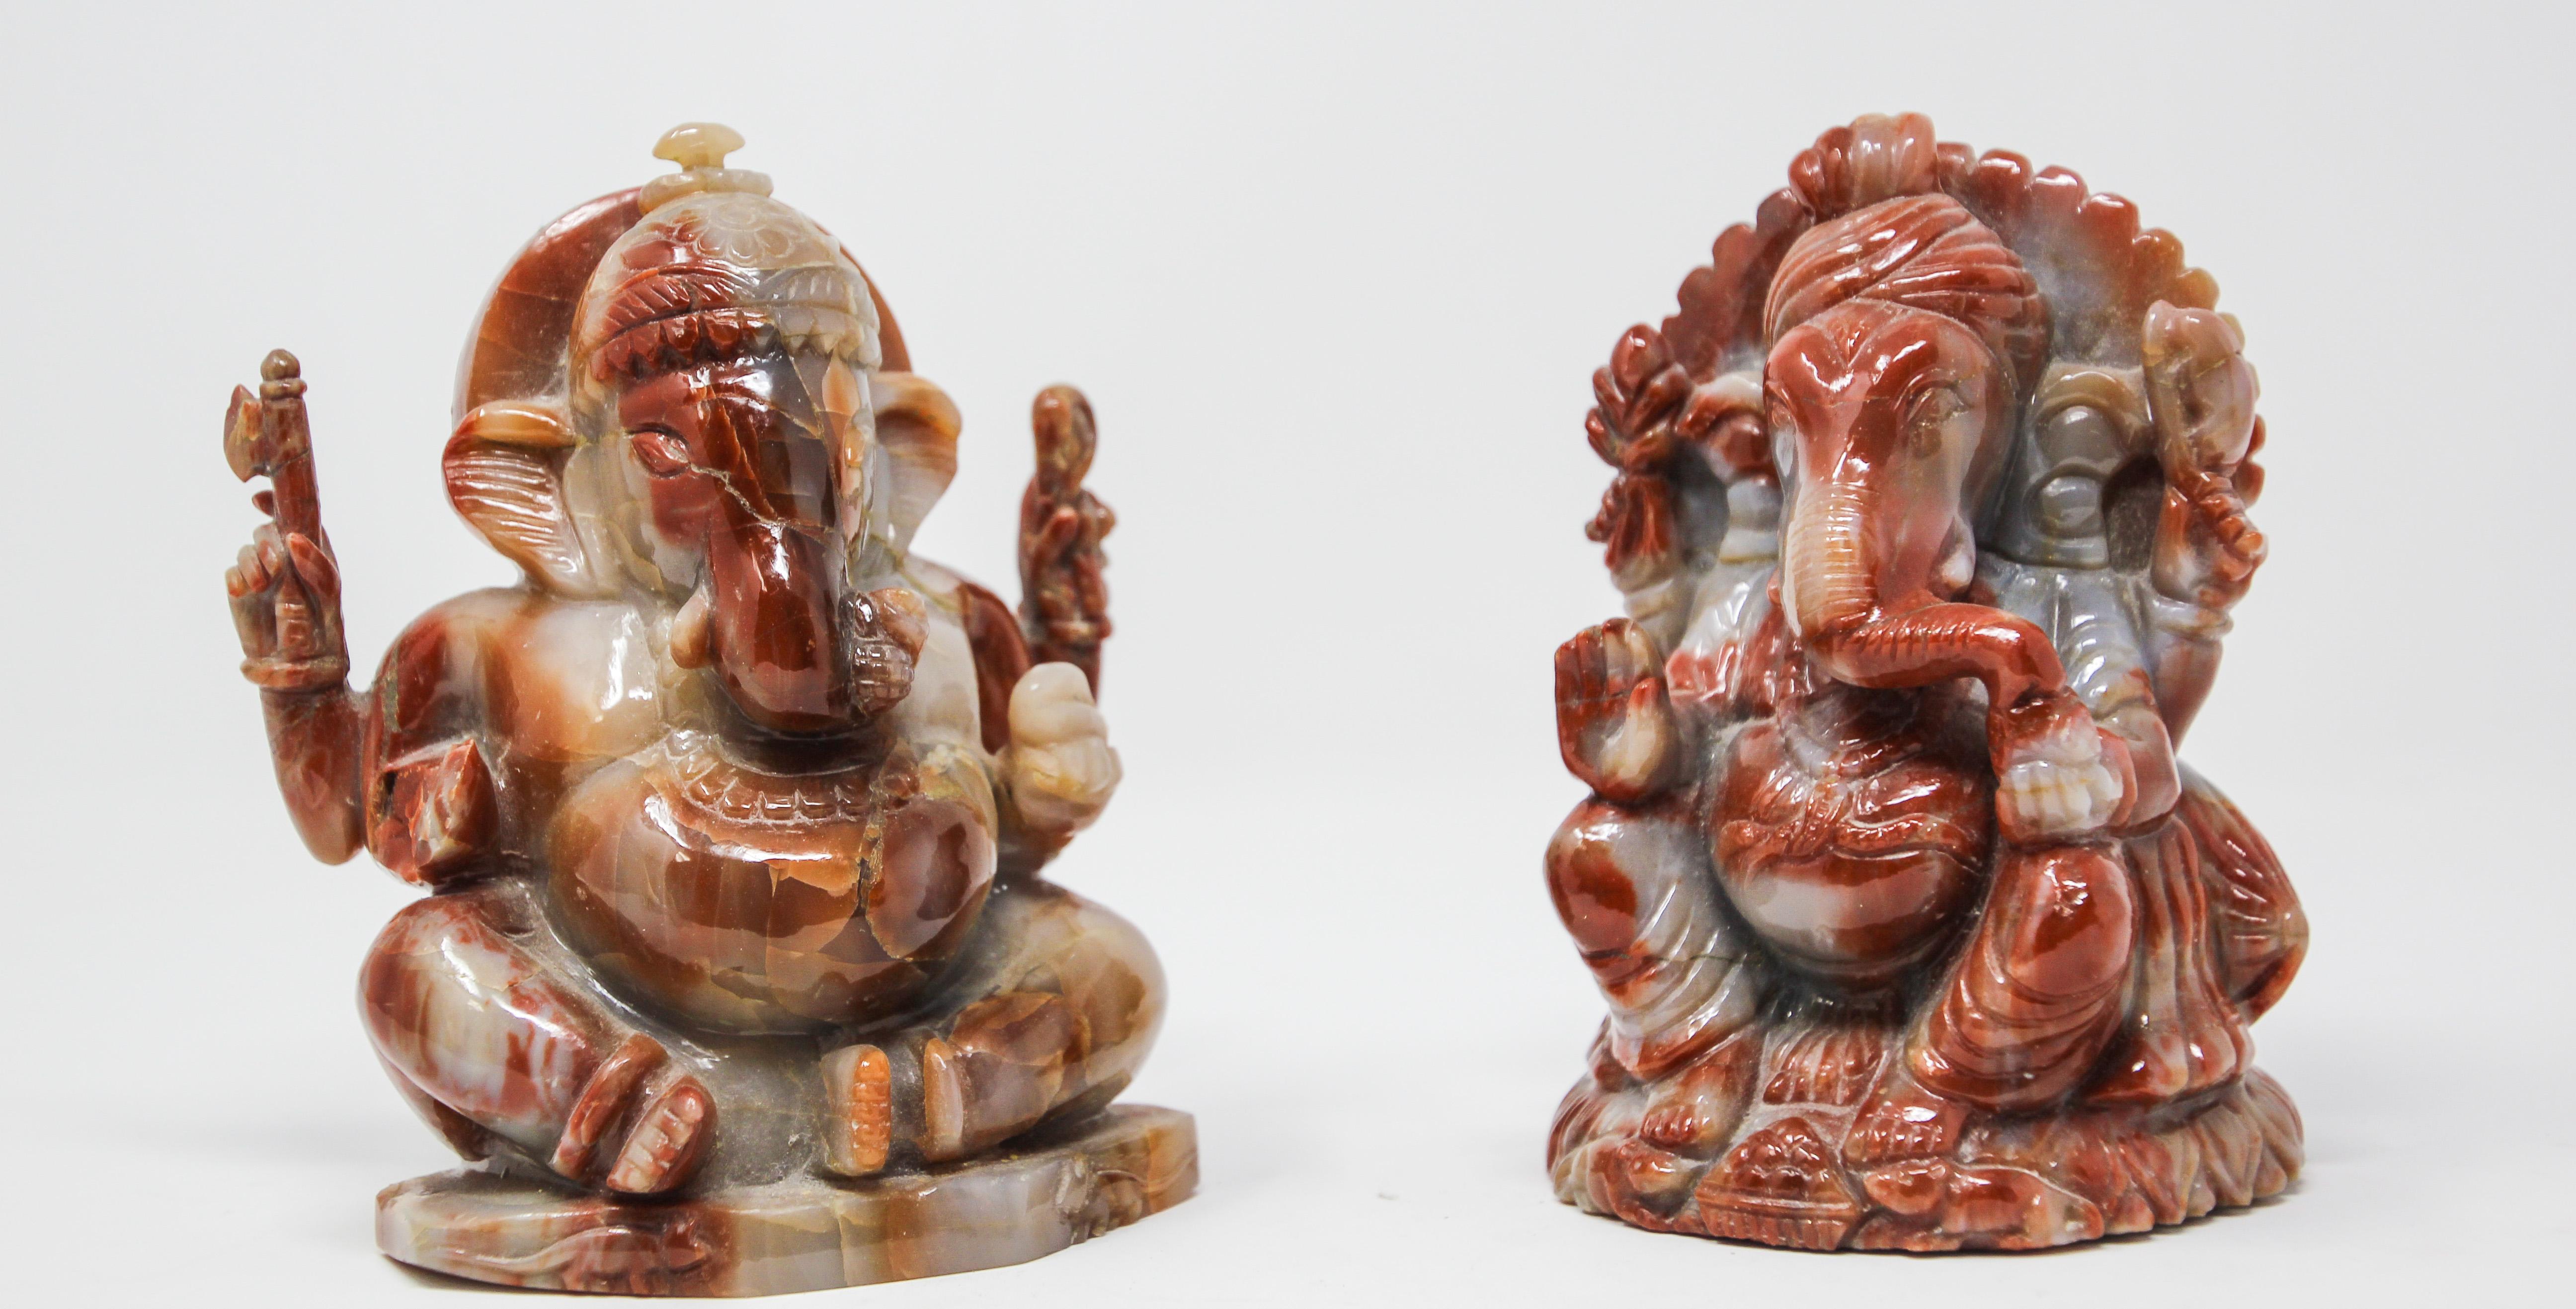 Vintage stone Hindu Ganesh collectible Hindu diety statue from India.
Hindu stone amulet for protection, Ganesh is widely revered as the remover of obstacles.
Ganesh: 5